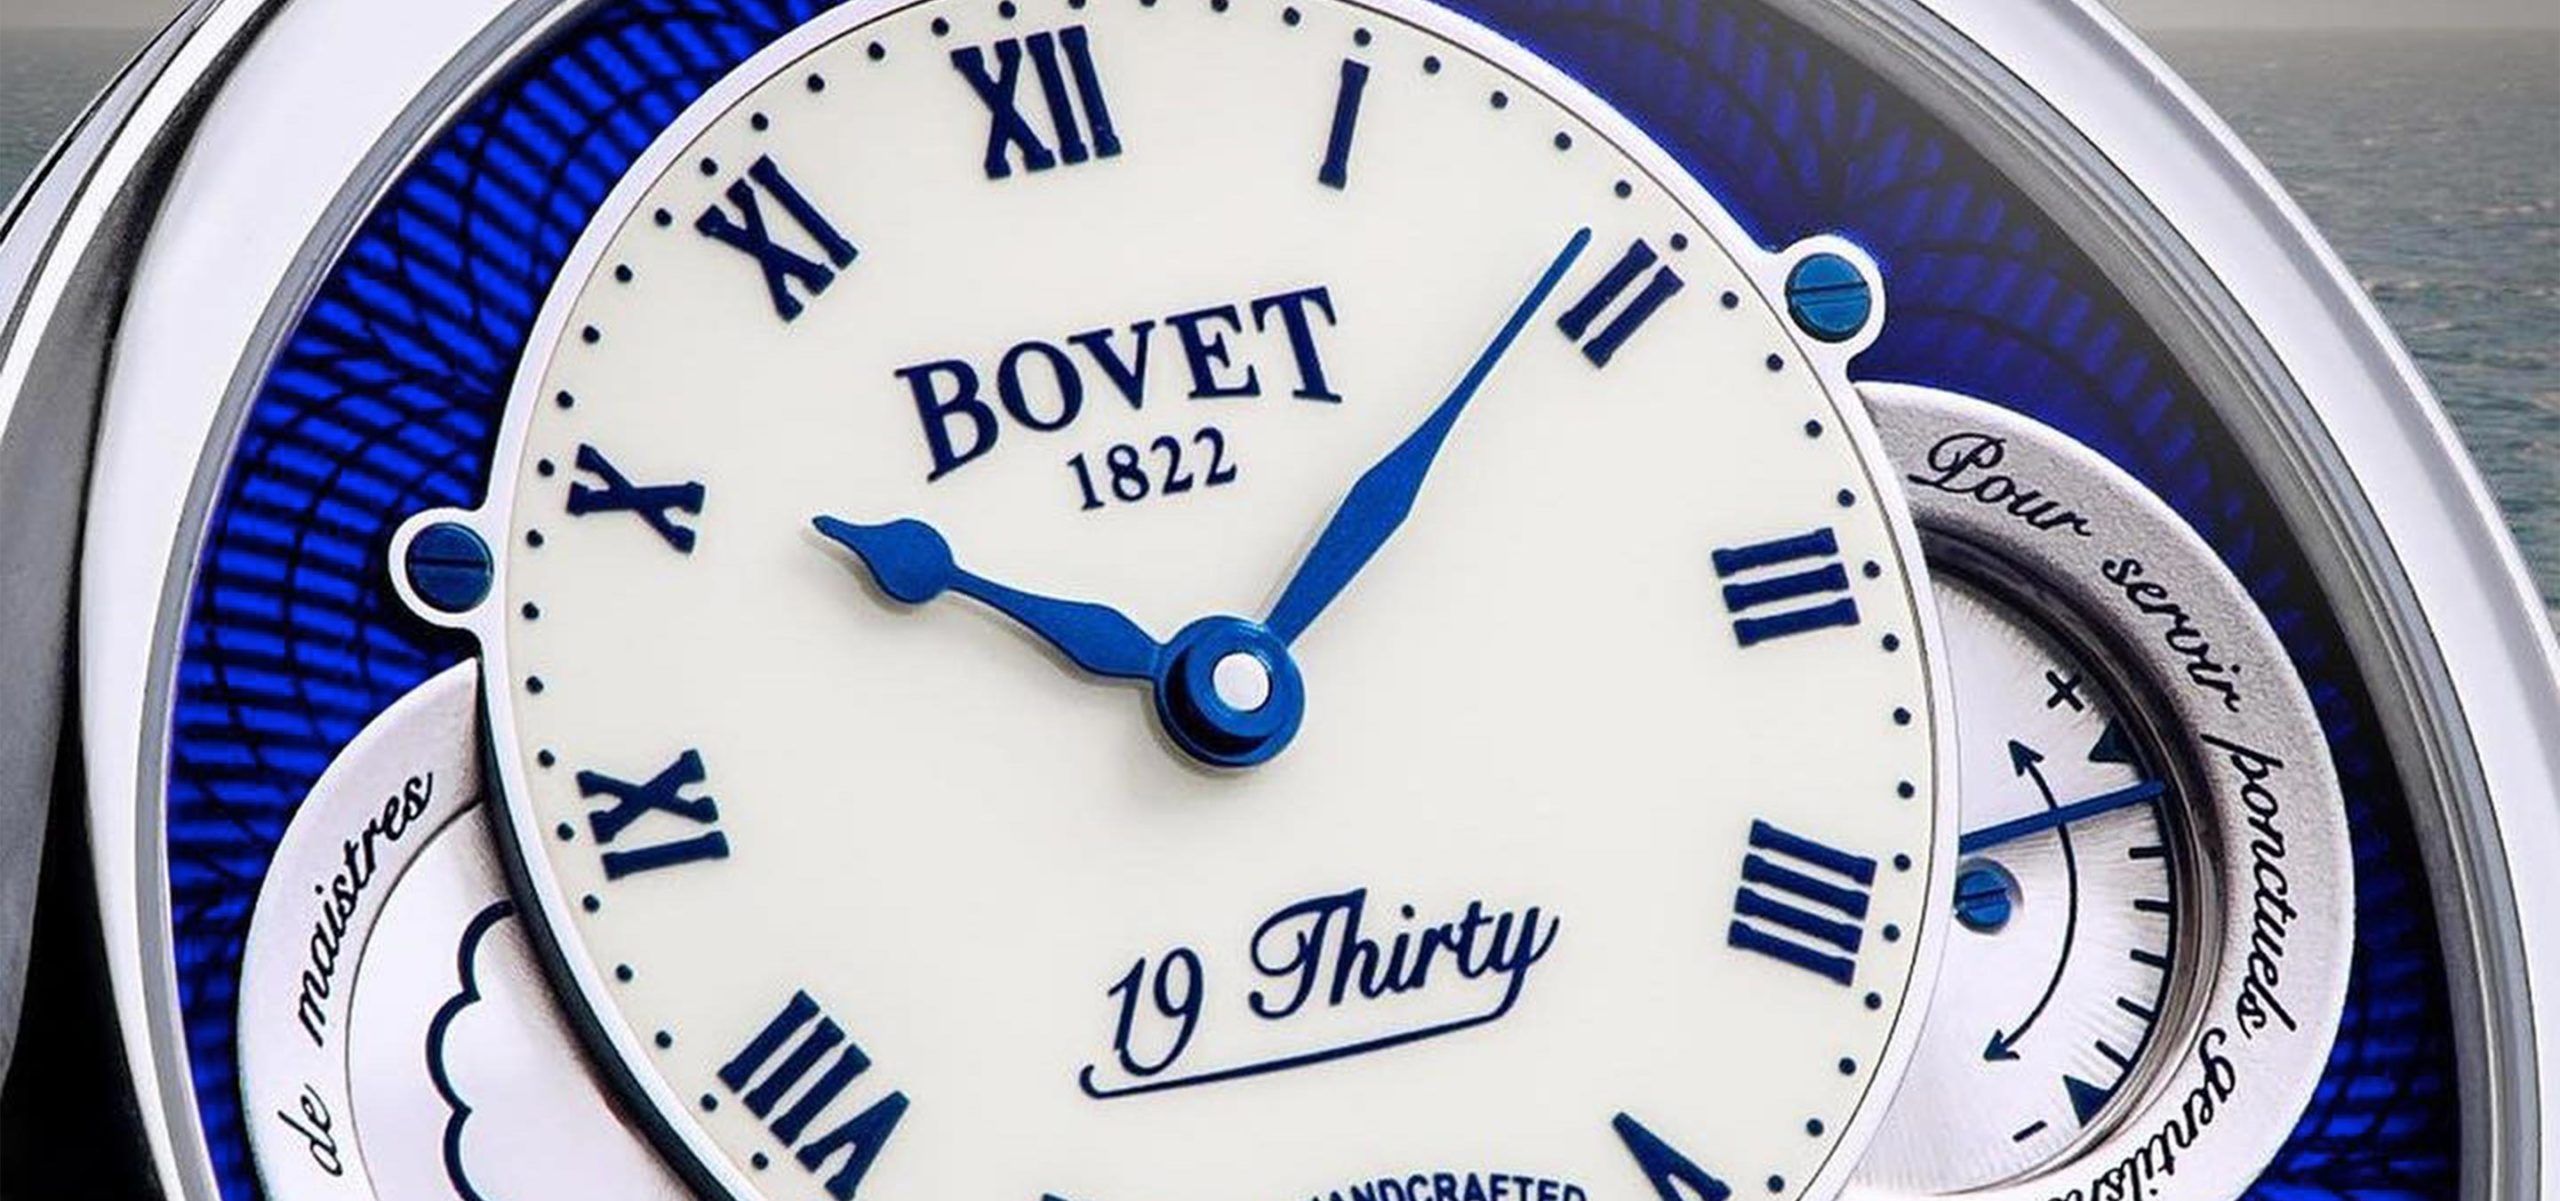 Visions In Blue: The Bovet Fleurier 19Thirty With Lacquer And Meteorite Dials